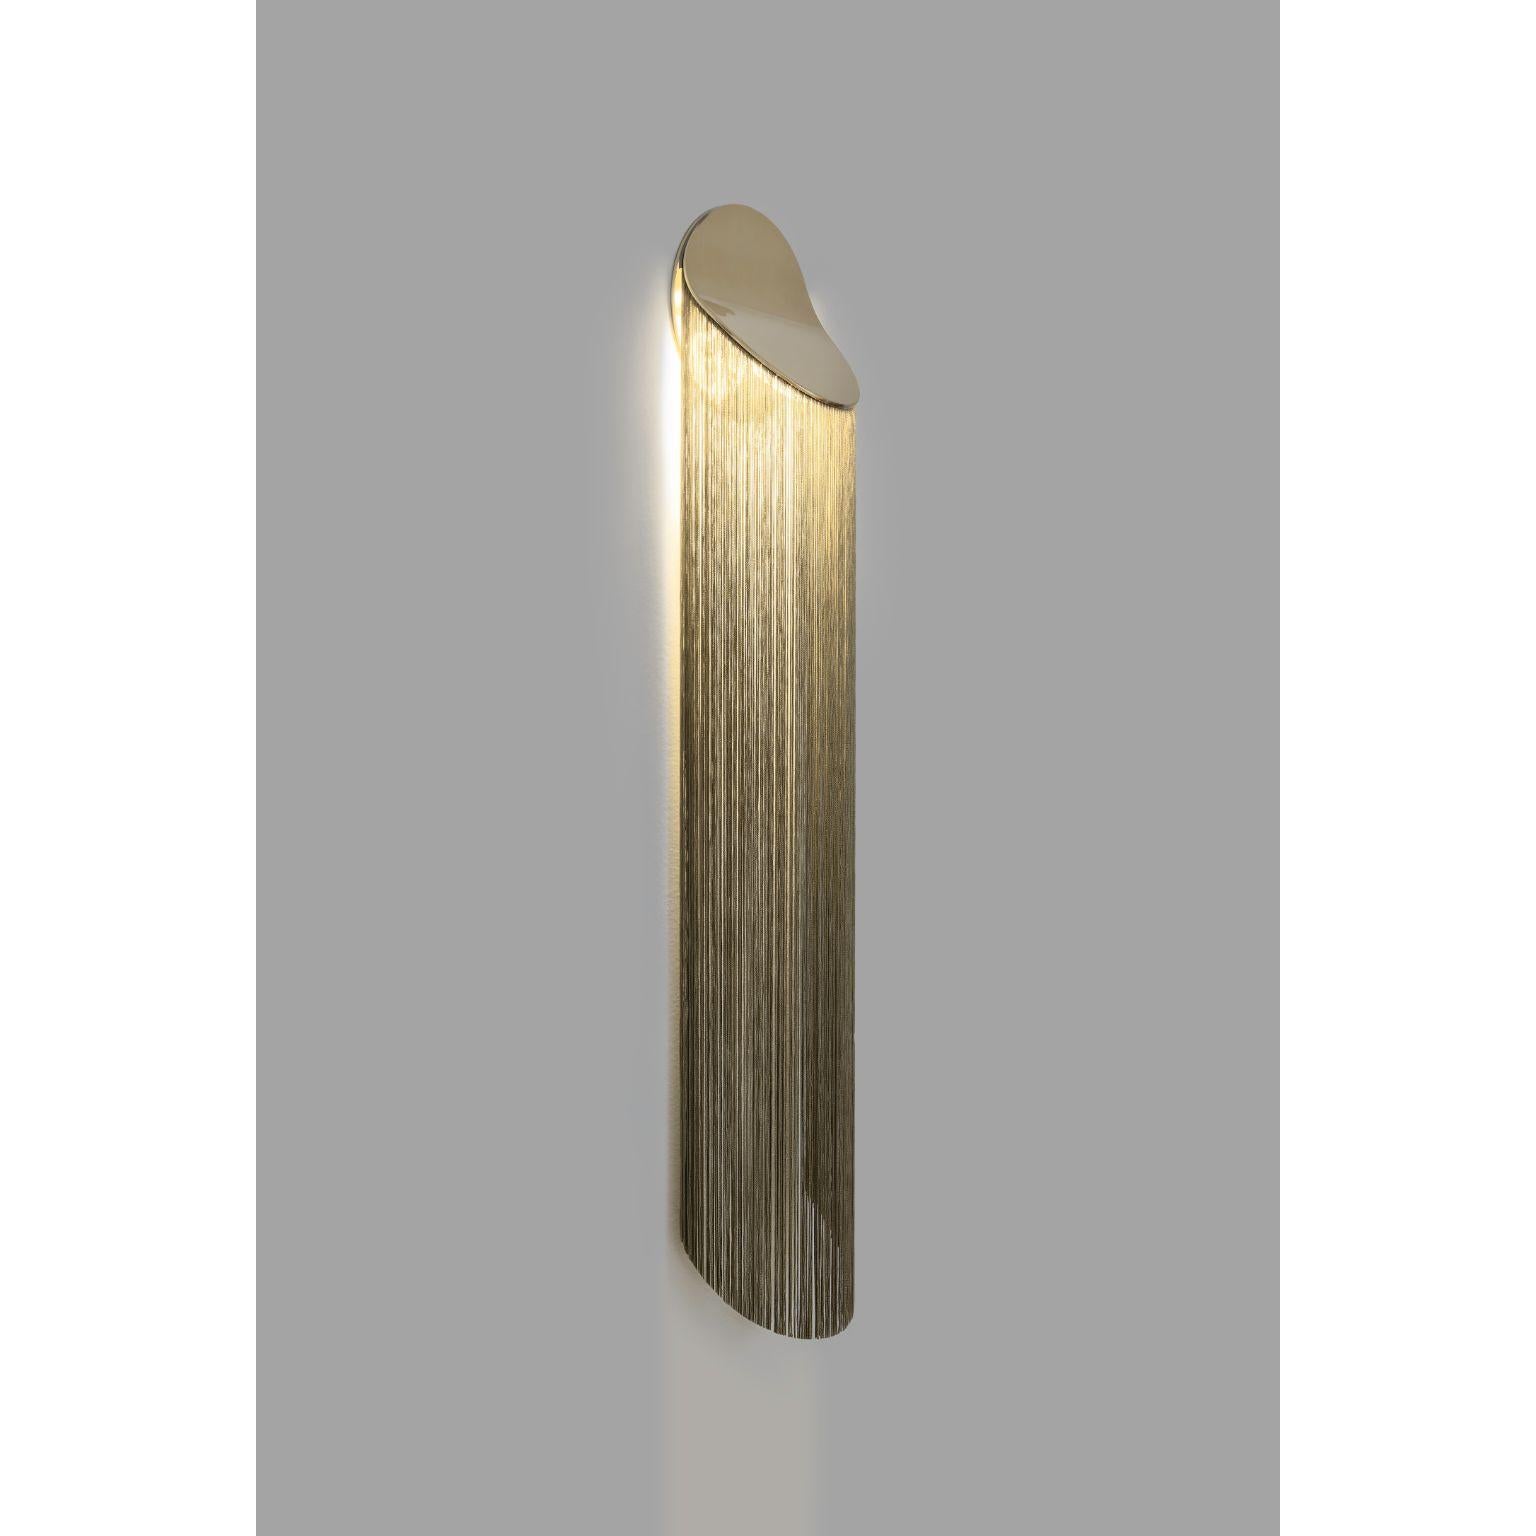 Cé Petite wall lamp long by Studio d'Armes
Design by Alexandre Joncas
Dimensions: 9.9 x 16.5 x H 86.5 cm
Materials: 12k Gold Plated Steel, Rayon fringes offered in different colors

Design by Alexandre Joncas
Cé Petite, with abridged